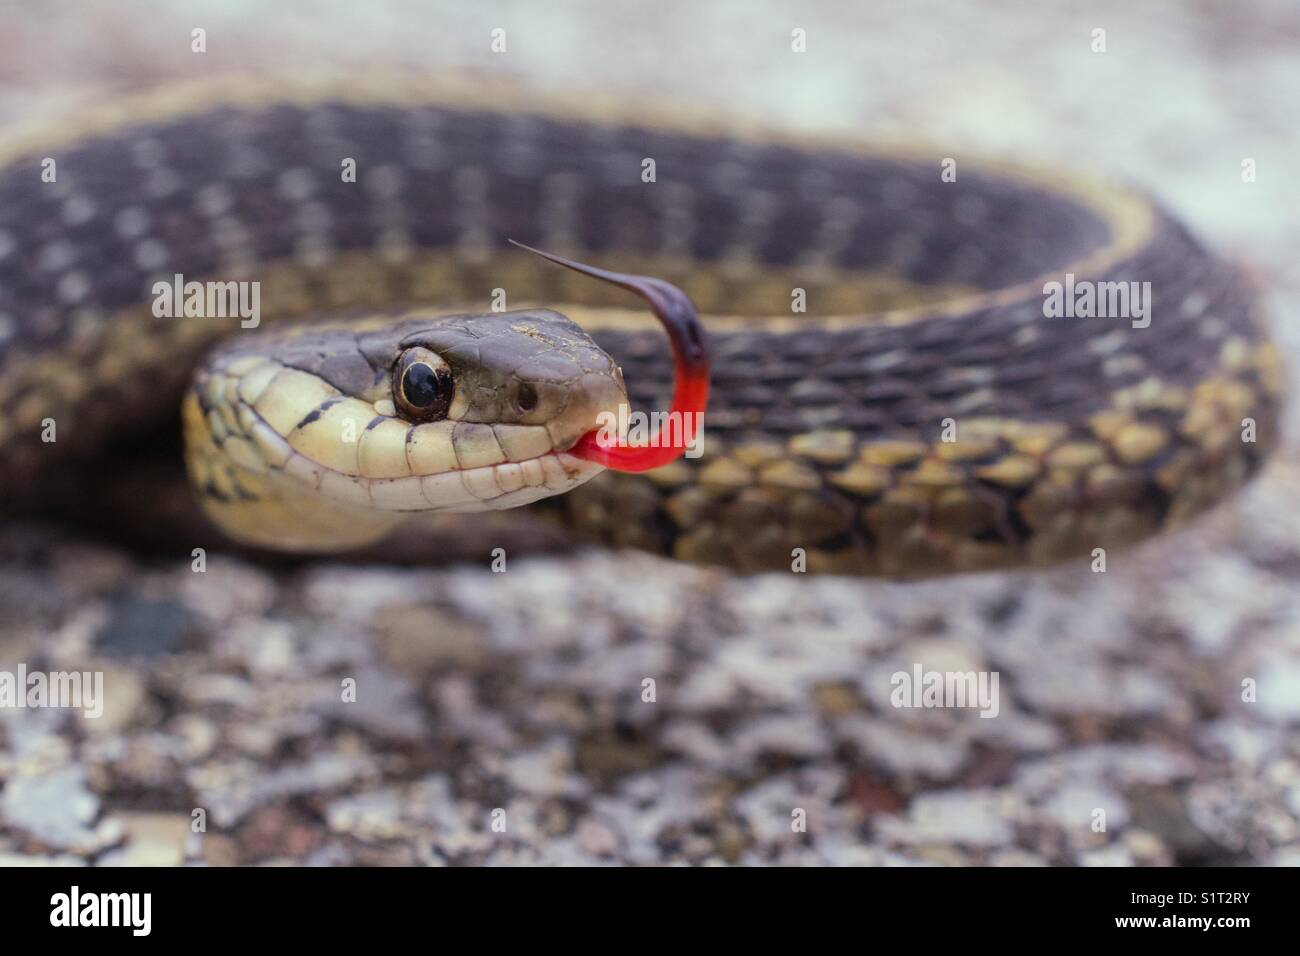 Small garter snake on a road surface starring at the camera with its split tongue sticking out. Class - Reptilia, Order - Squamata, Suborder - Serpentes, Family - Colubridae, , Species - T. Sirtalis. Stock Photo